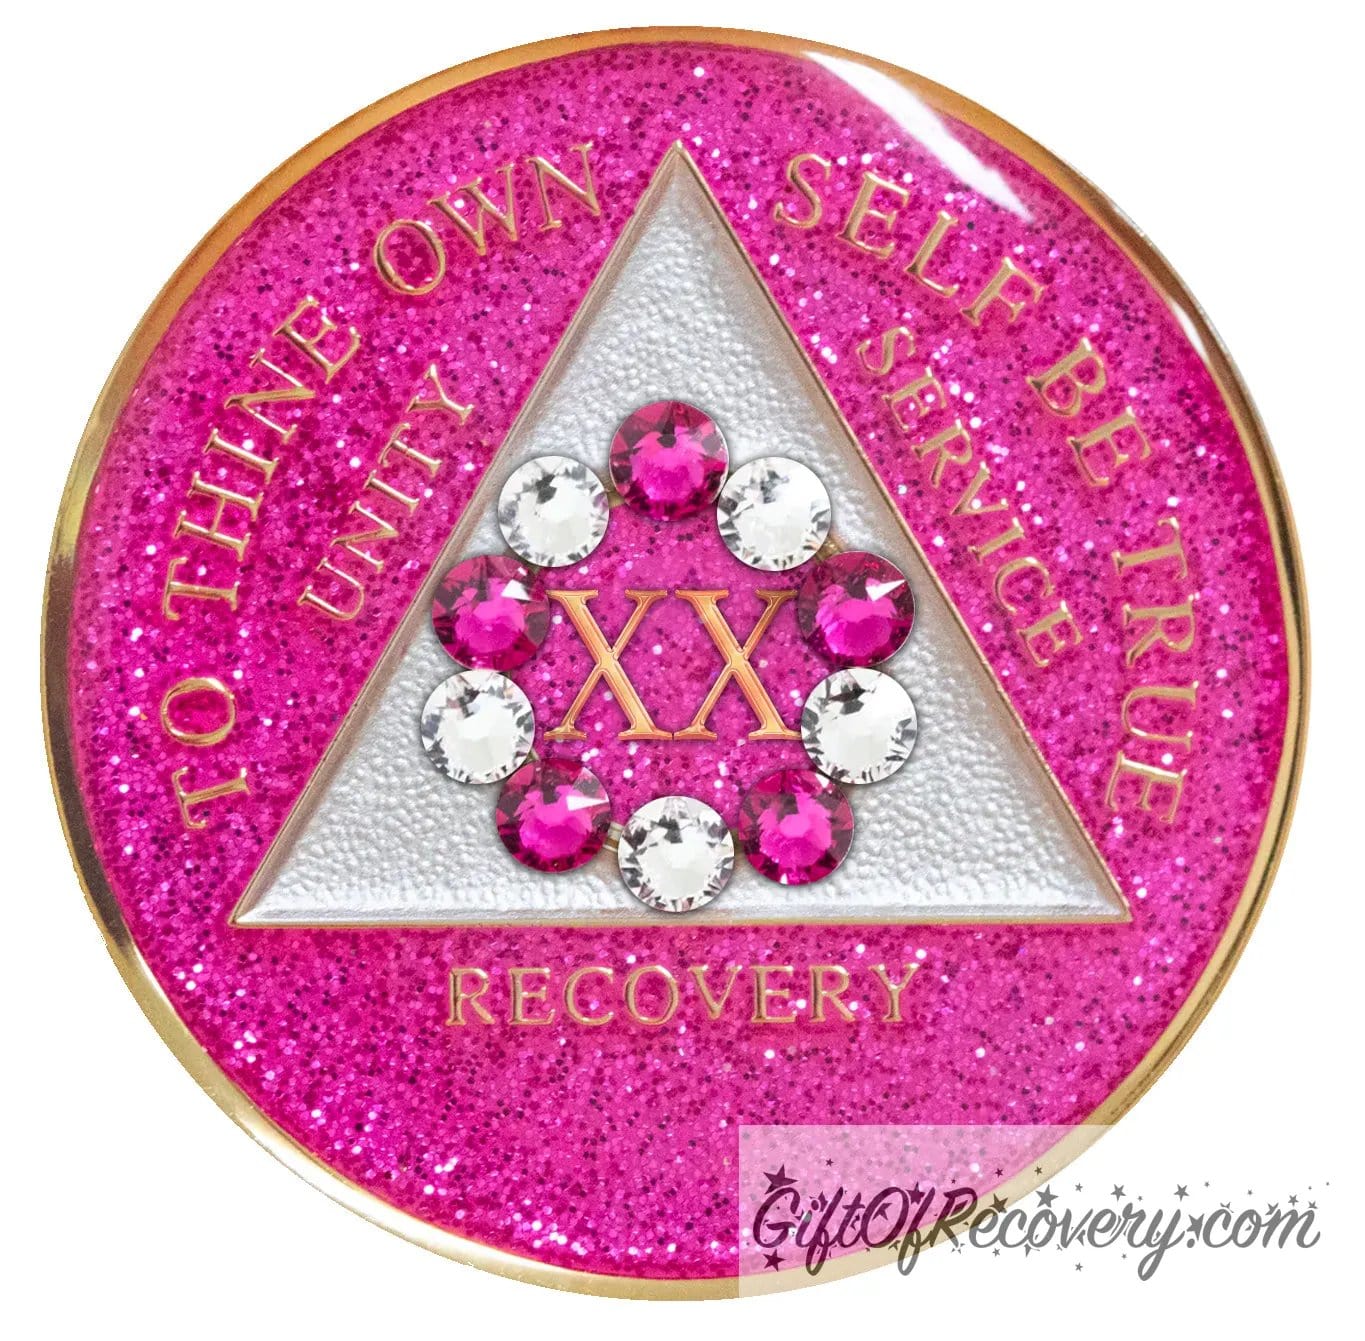 20 Year princess pink glitter 10th step AA medallion with 5 pink genuine crystals and 5 clear genuine crystal, formed in a circle around the year, to thine own self be true, triangle in the center and unity, service, recovery, along with rim of medallion are slightly raised in 14k gold, the center of the triangle is pearl white with the circle being pink glitter, all emphasizing action and reflection, for your favorite sober princess.